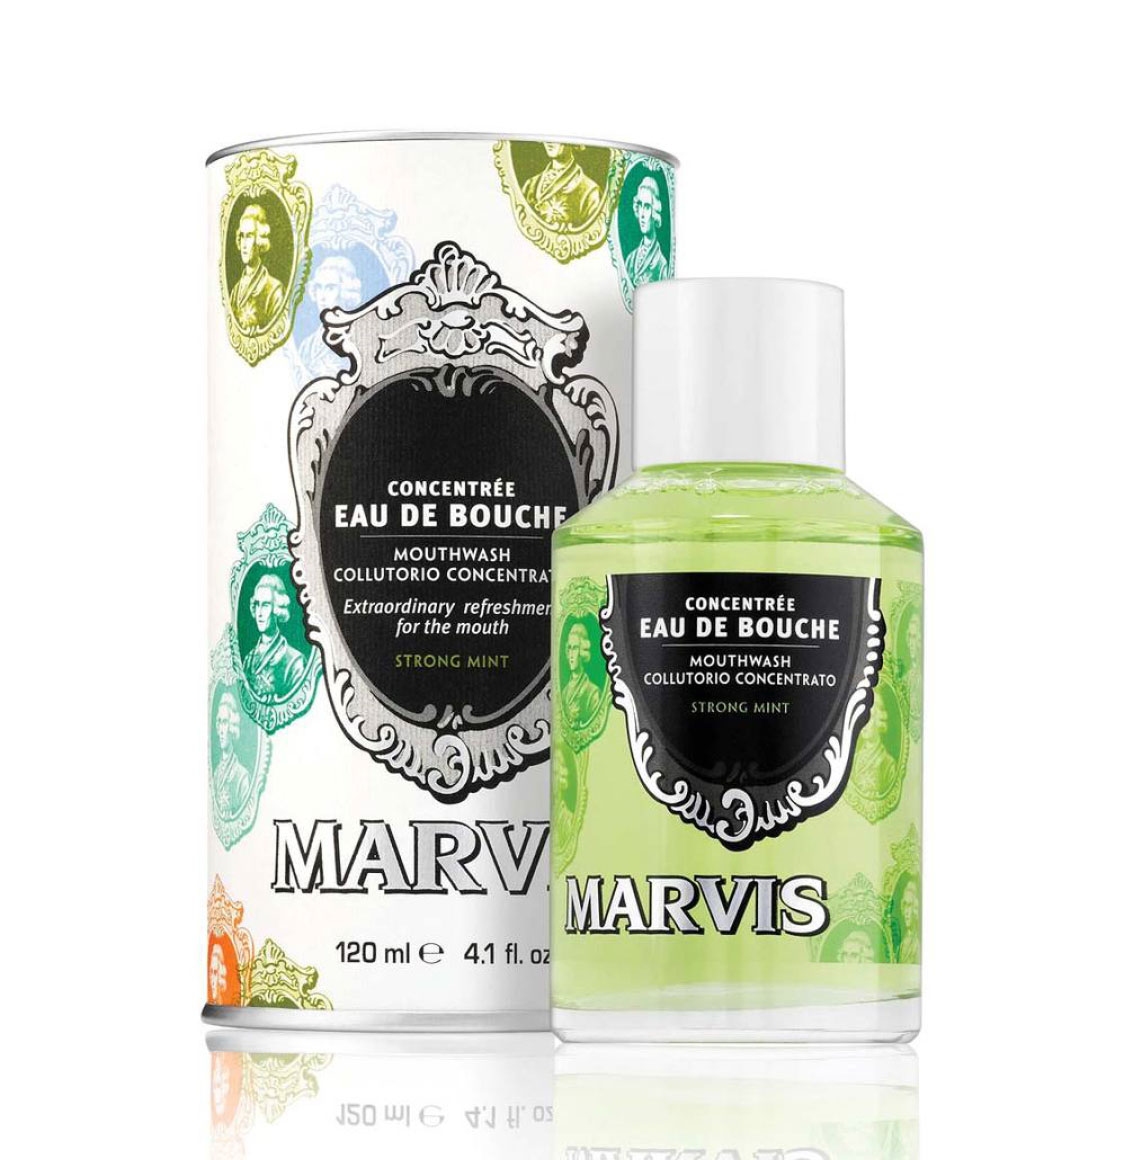 Marvis Mouthwash Concentrate Strong Mint 120ml